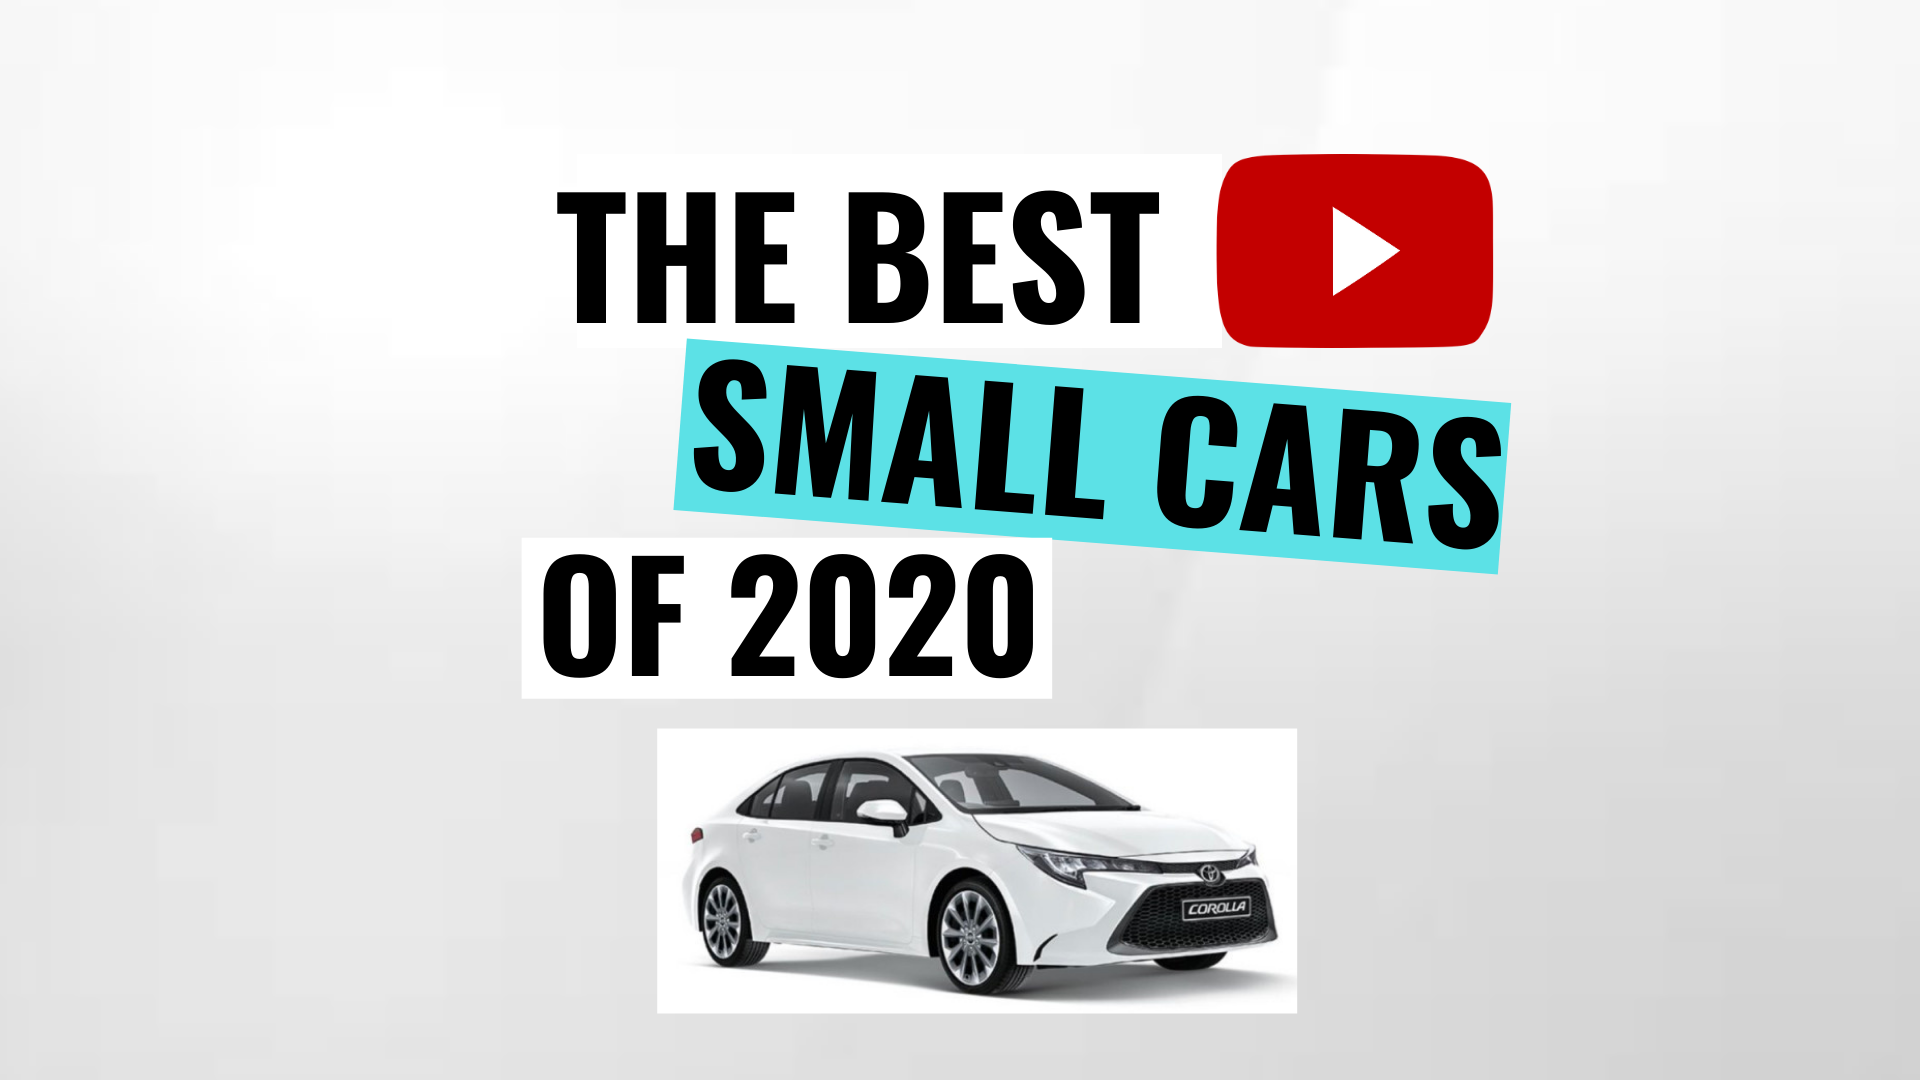 The Best Small Cars of 2020